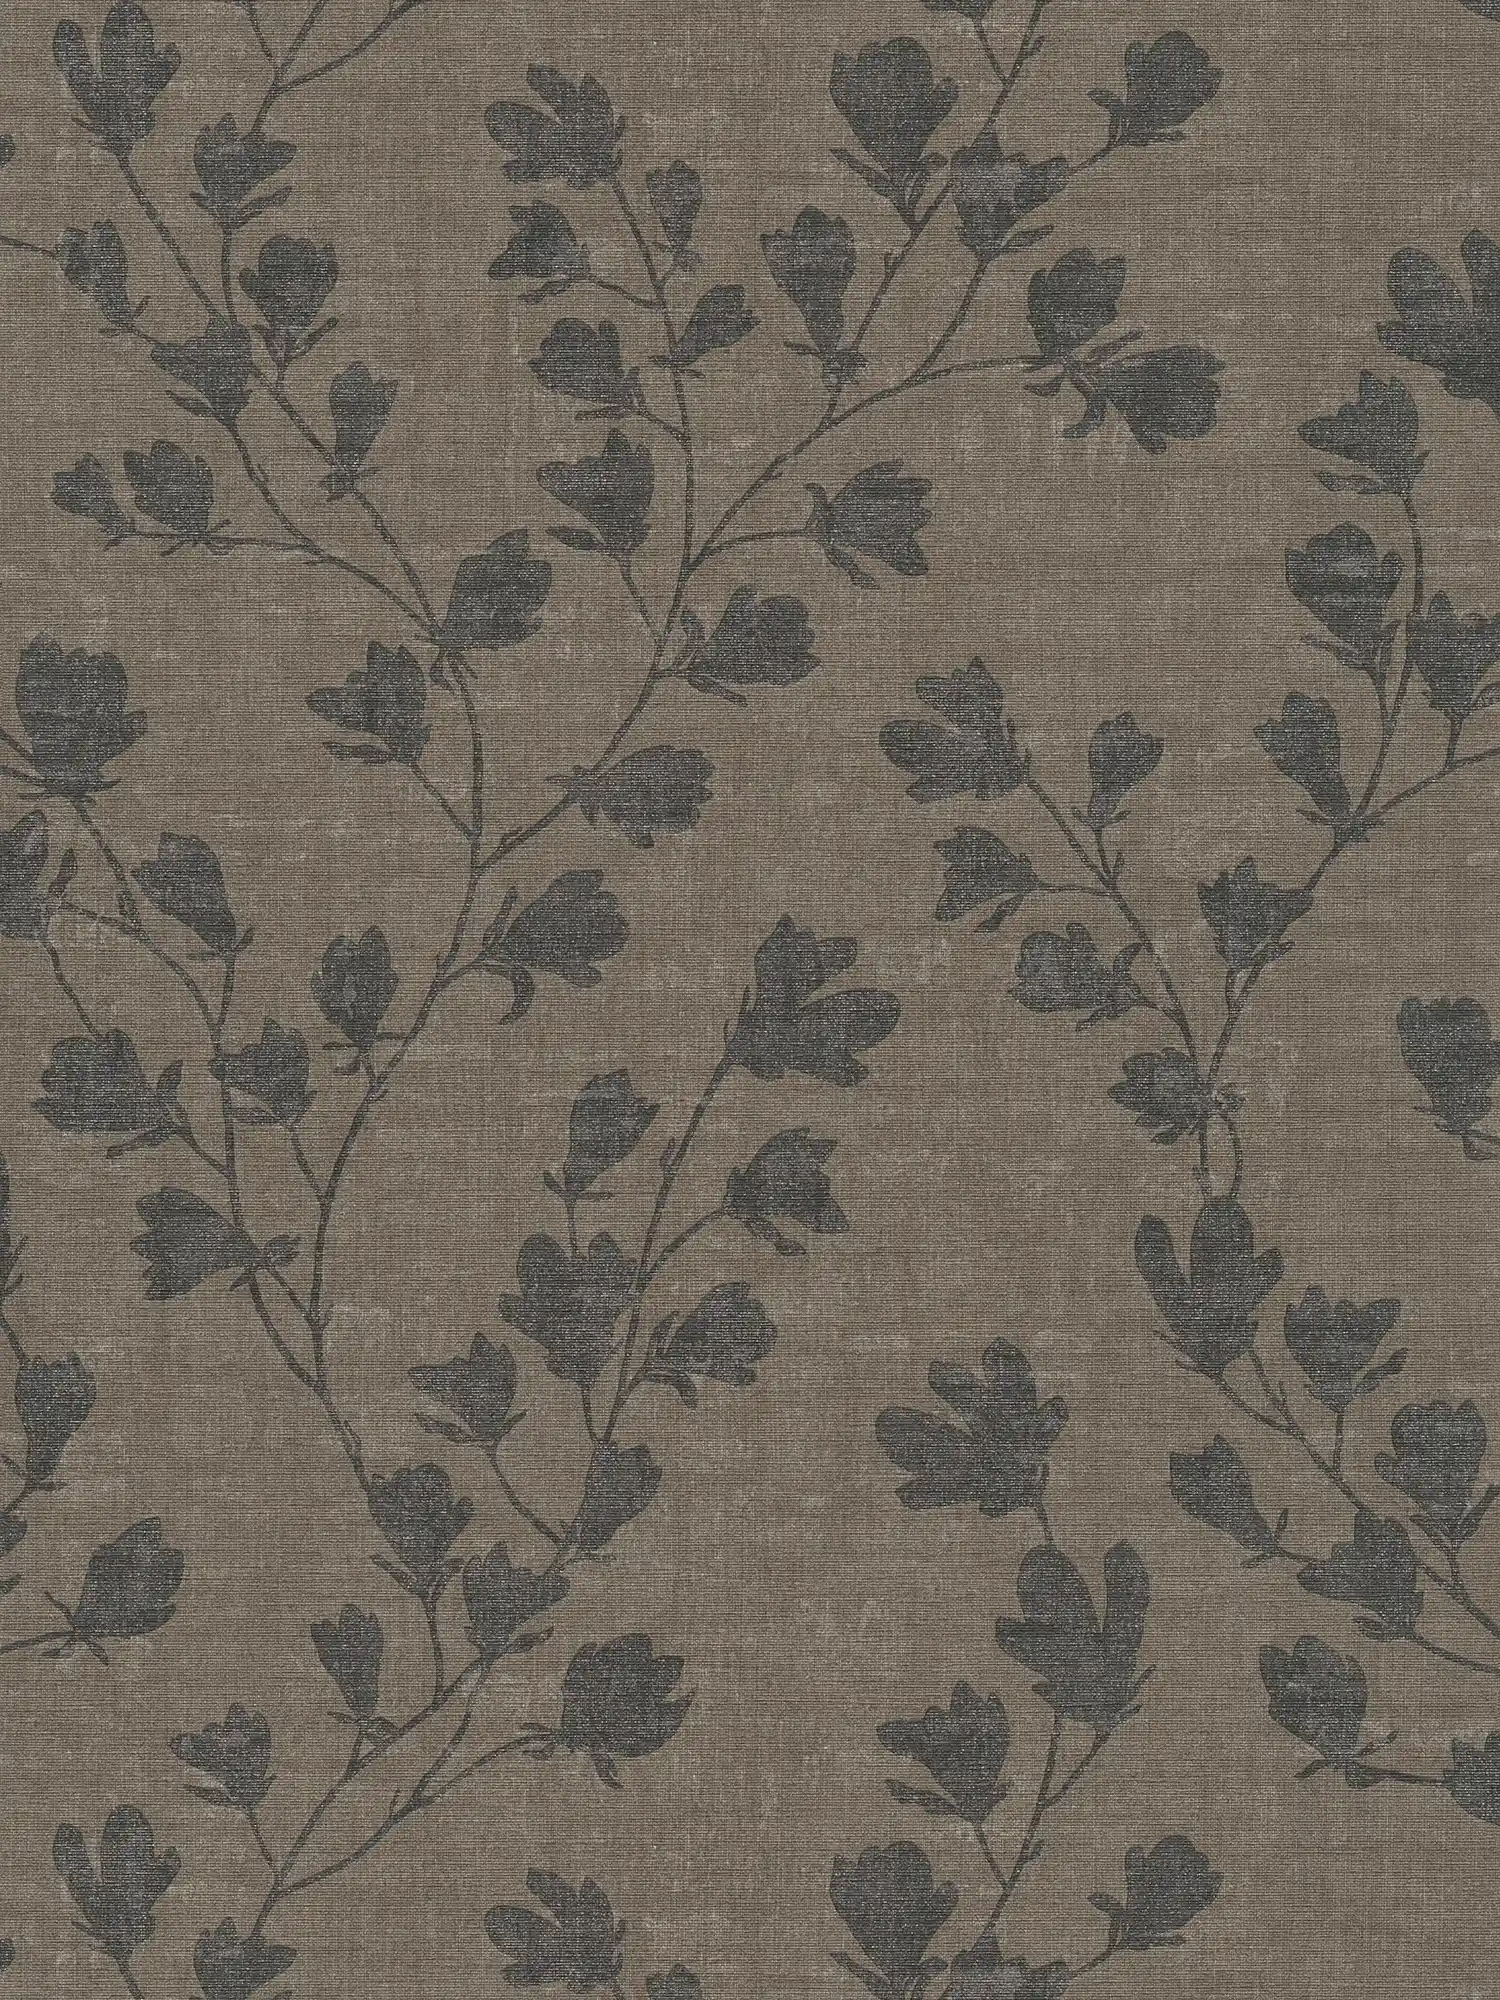 Non-woven wallpaper with leaf tendrils pattern - brown, black
